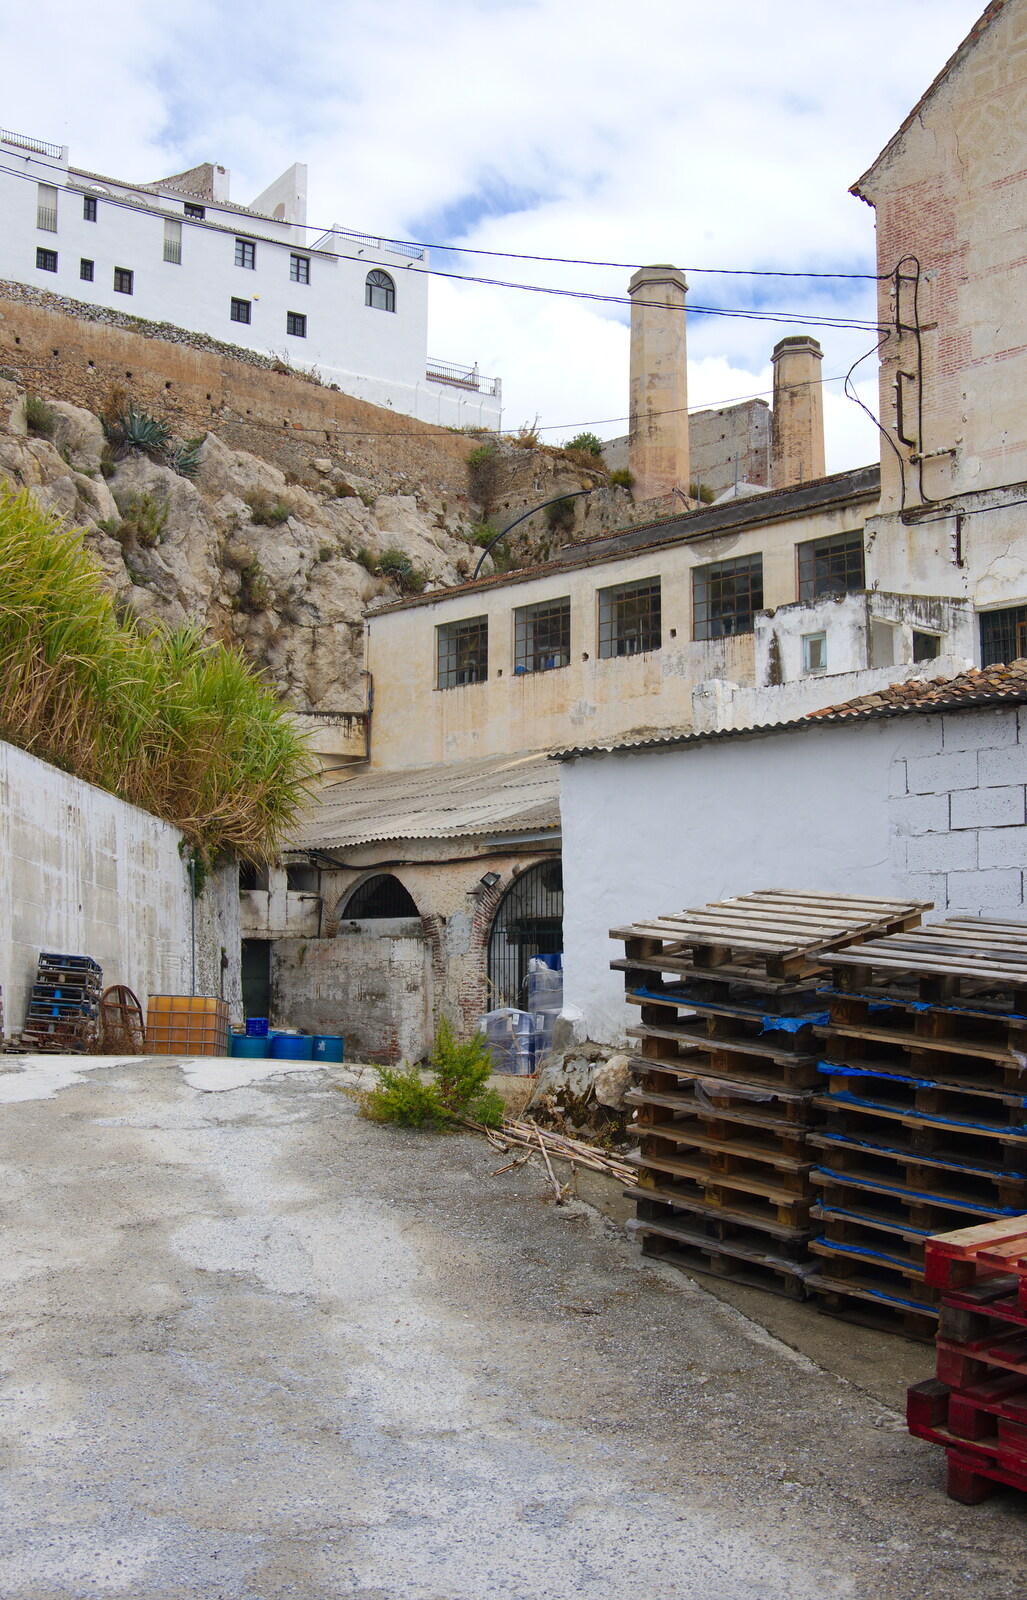 The derelict sugar-cane factory from The Caves of Nerja, and Frigiliana, Andalusia, Spain - 18th April 2019